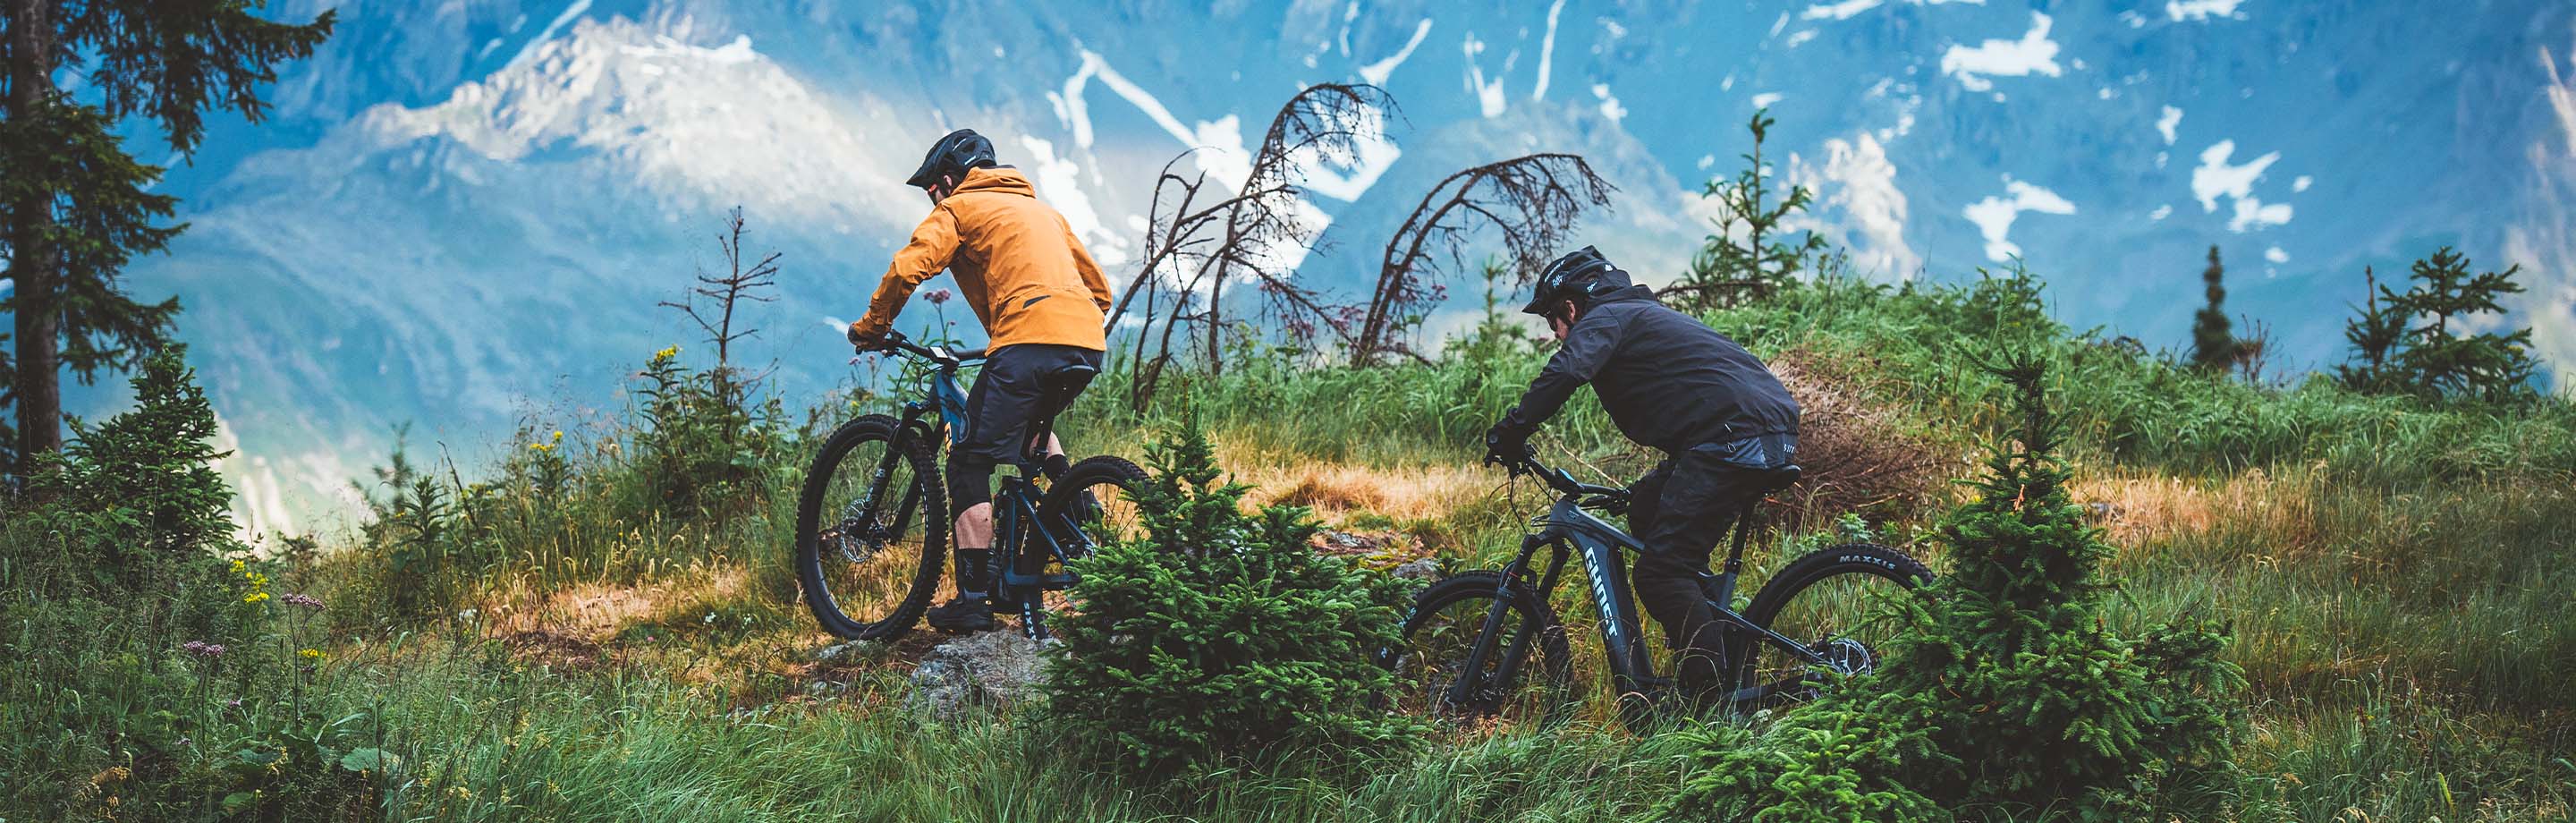 Ghost Mountain Bikes: From the Garage into the Wide World